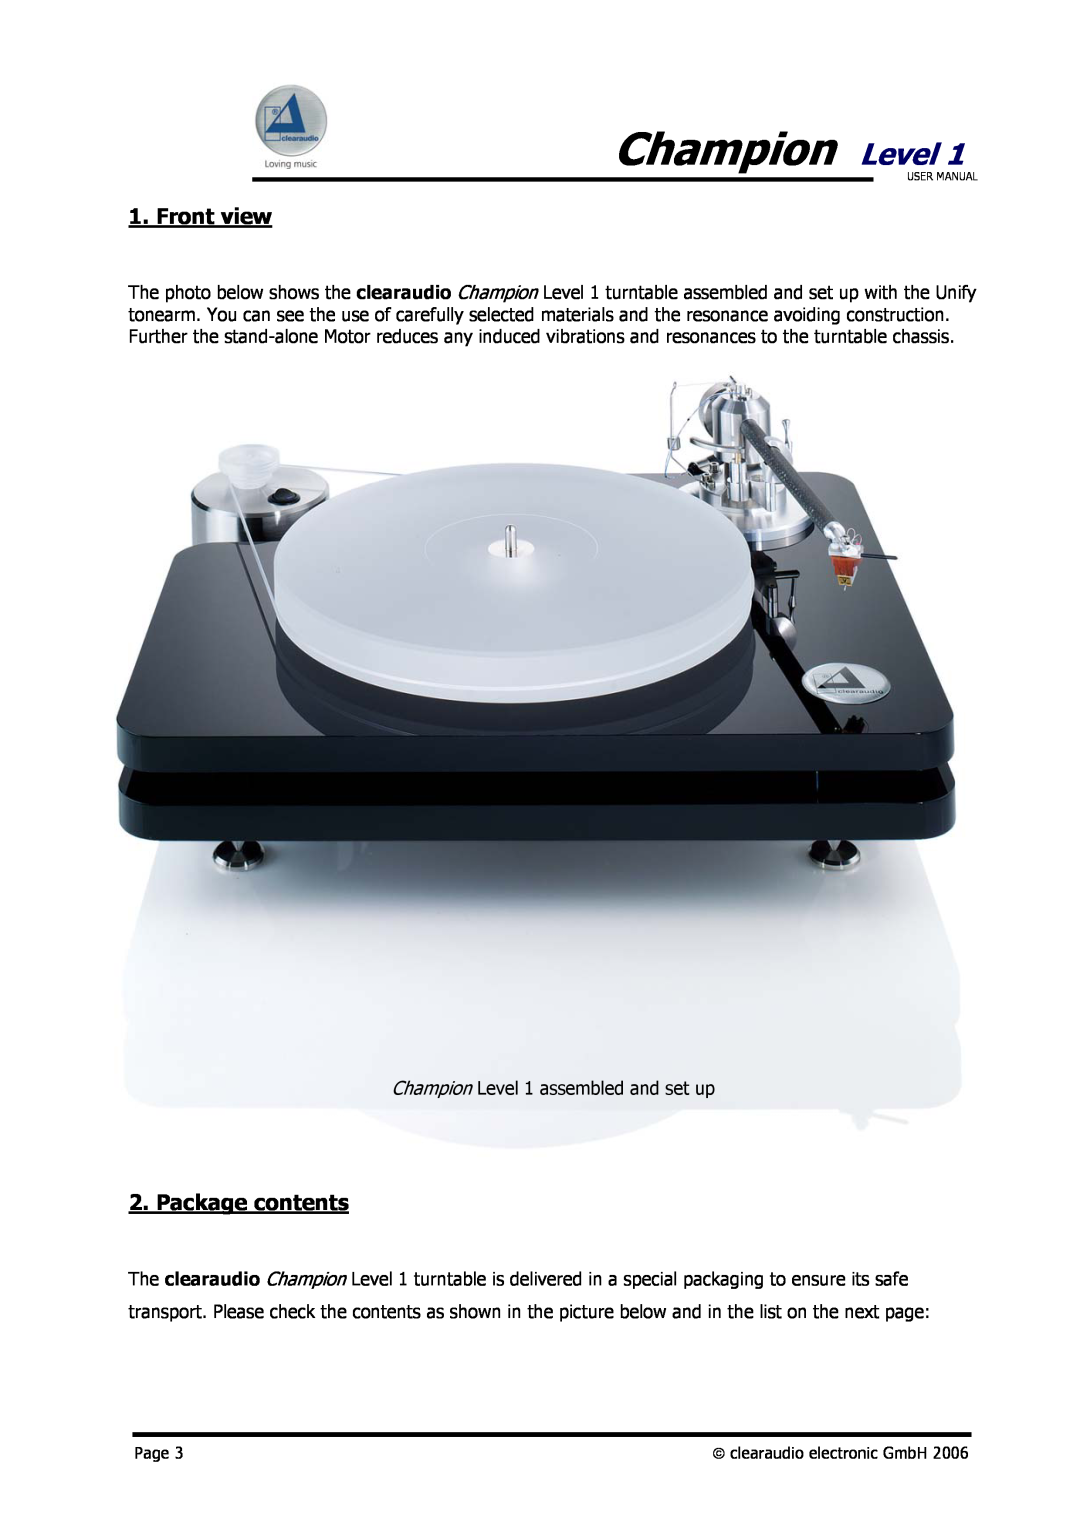 Clearaudio user manual Front view, Package contents, Champion Level 